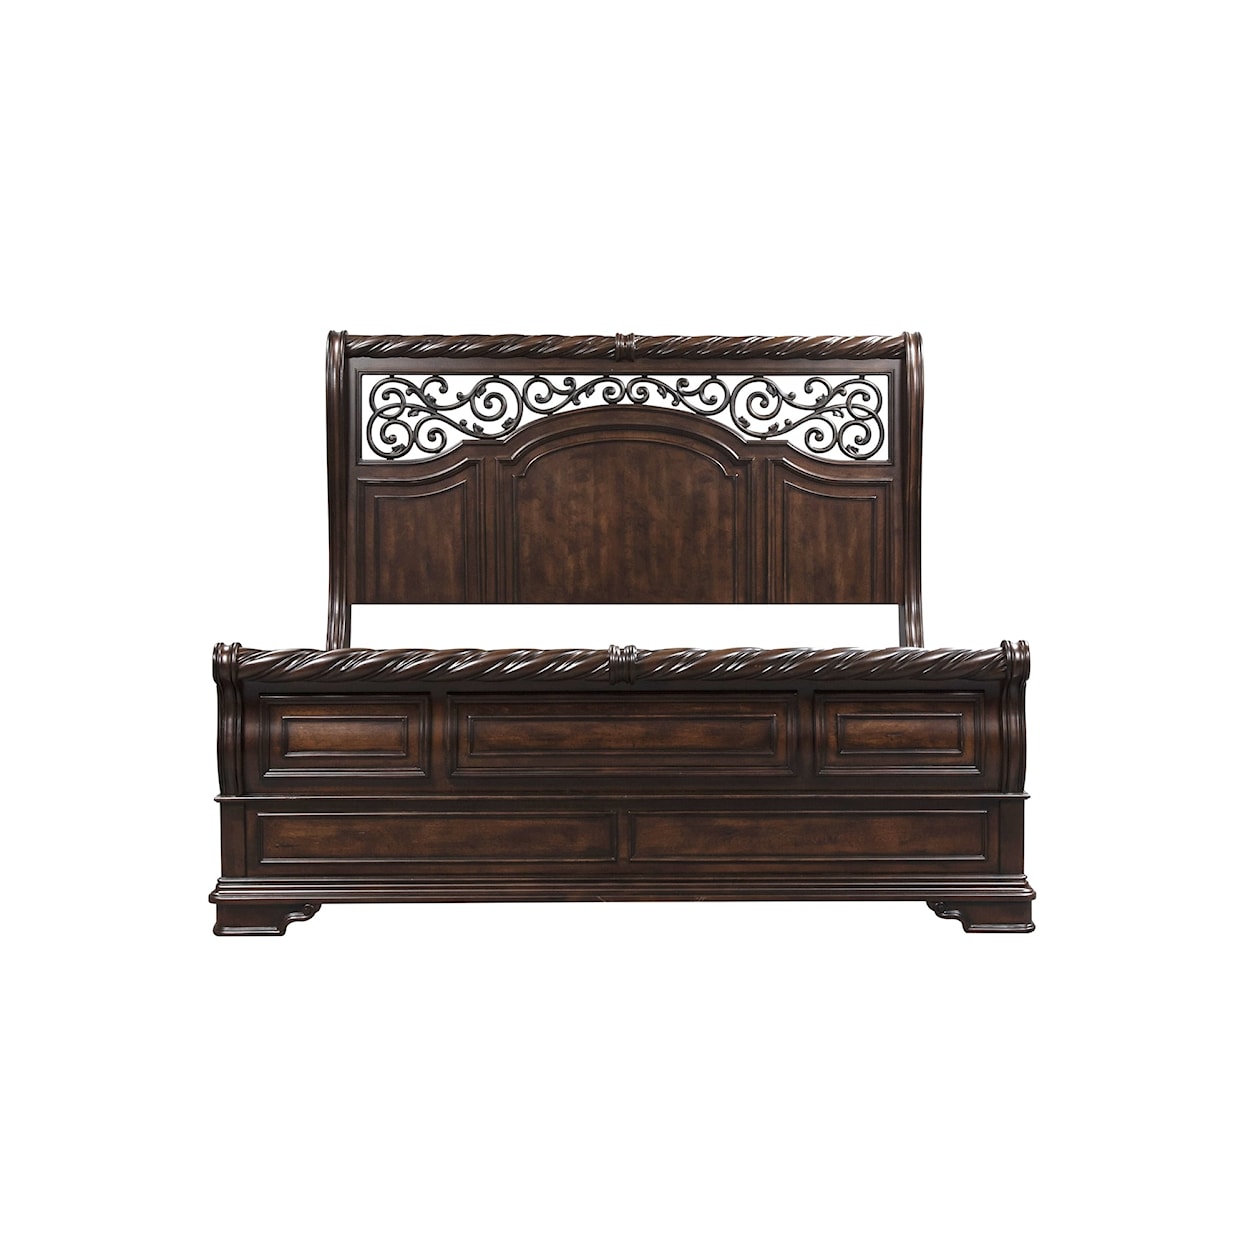 Libby Arbor Place King Sleigh Bed